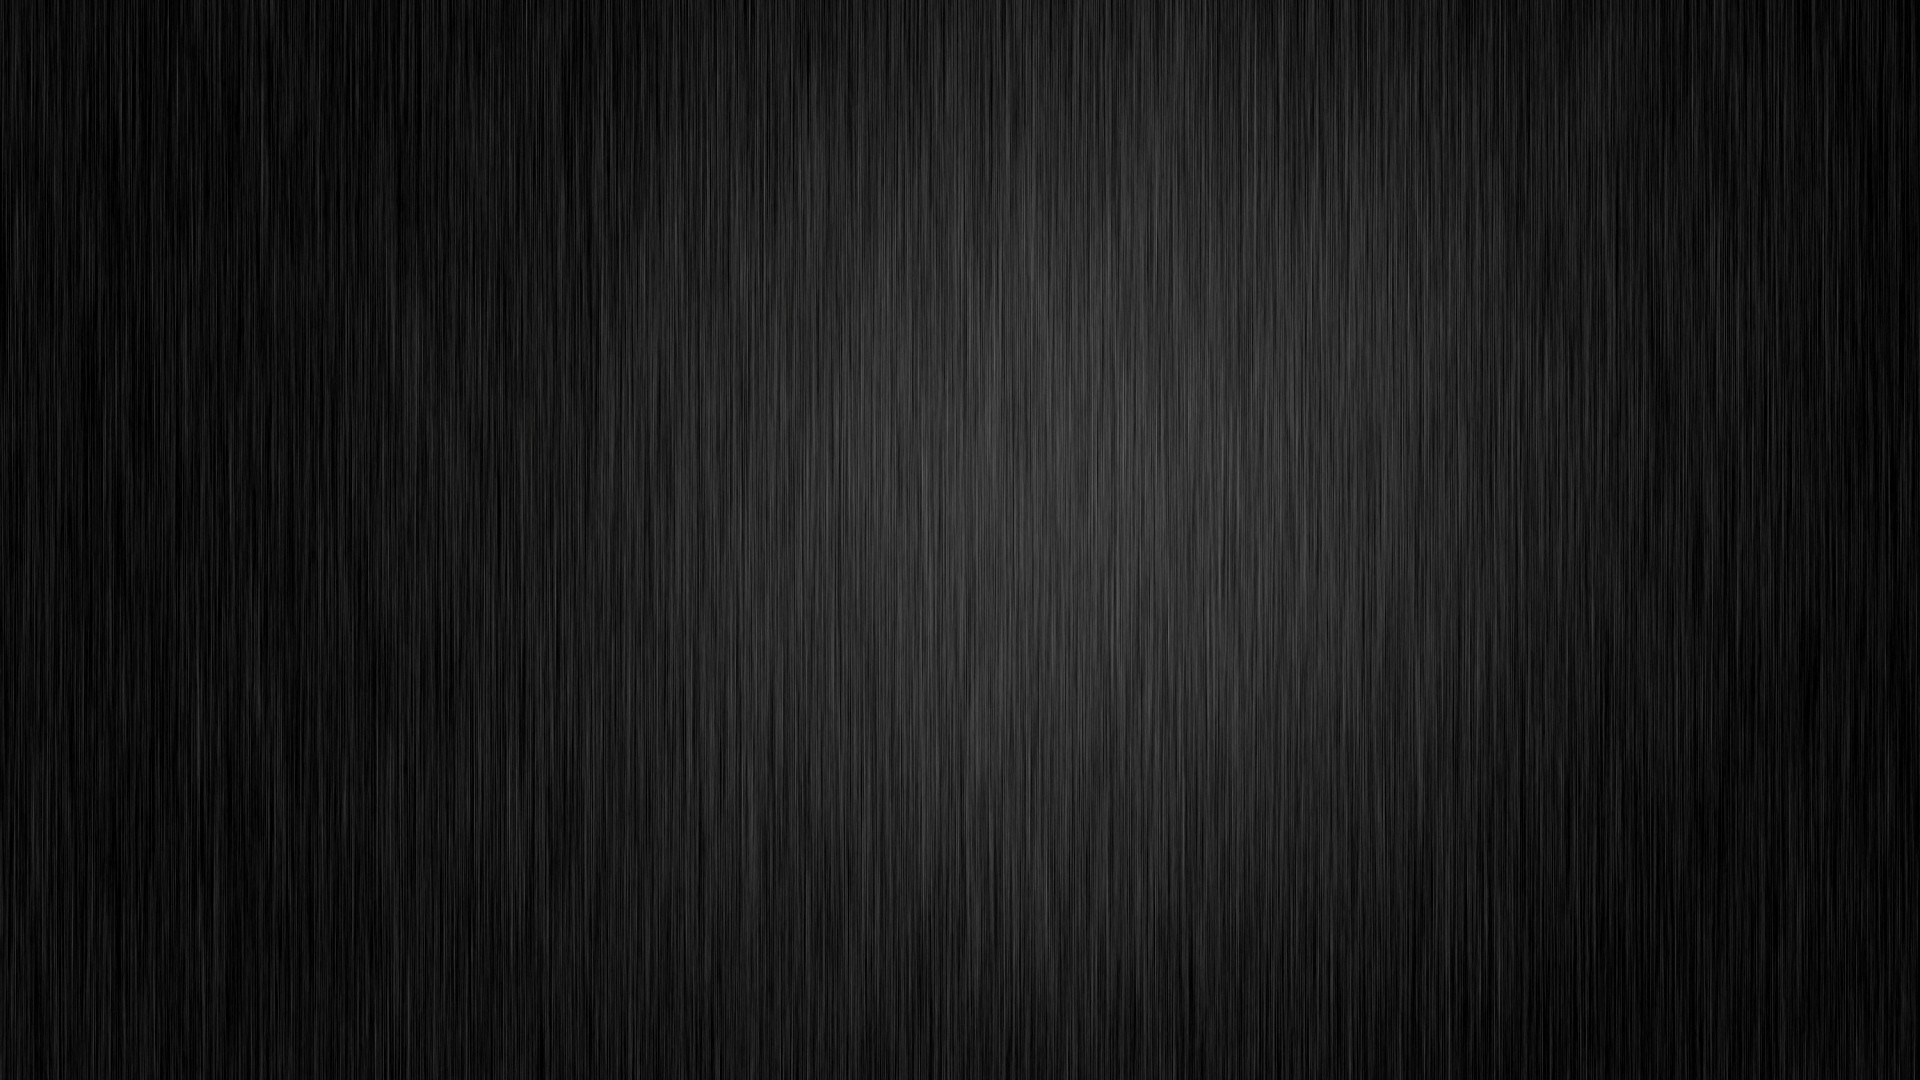 1920x1080 black hd wallpapers for windows 7. Top 25 Black Wallpapers HD for IPhone  iPhone2Lovely